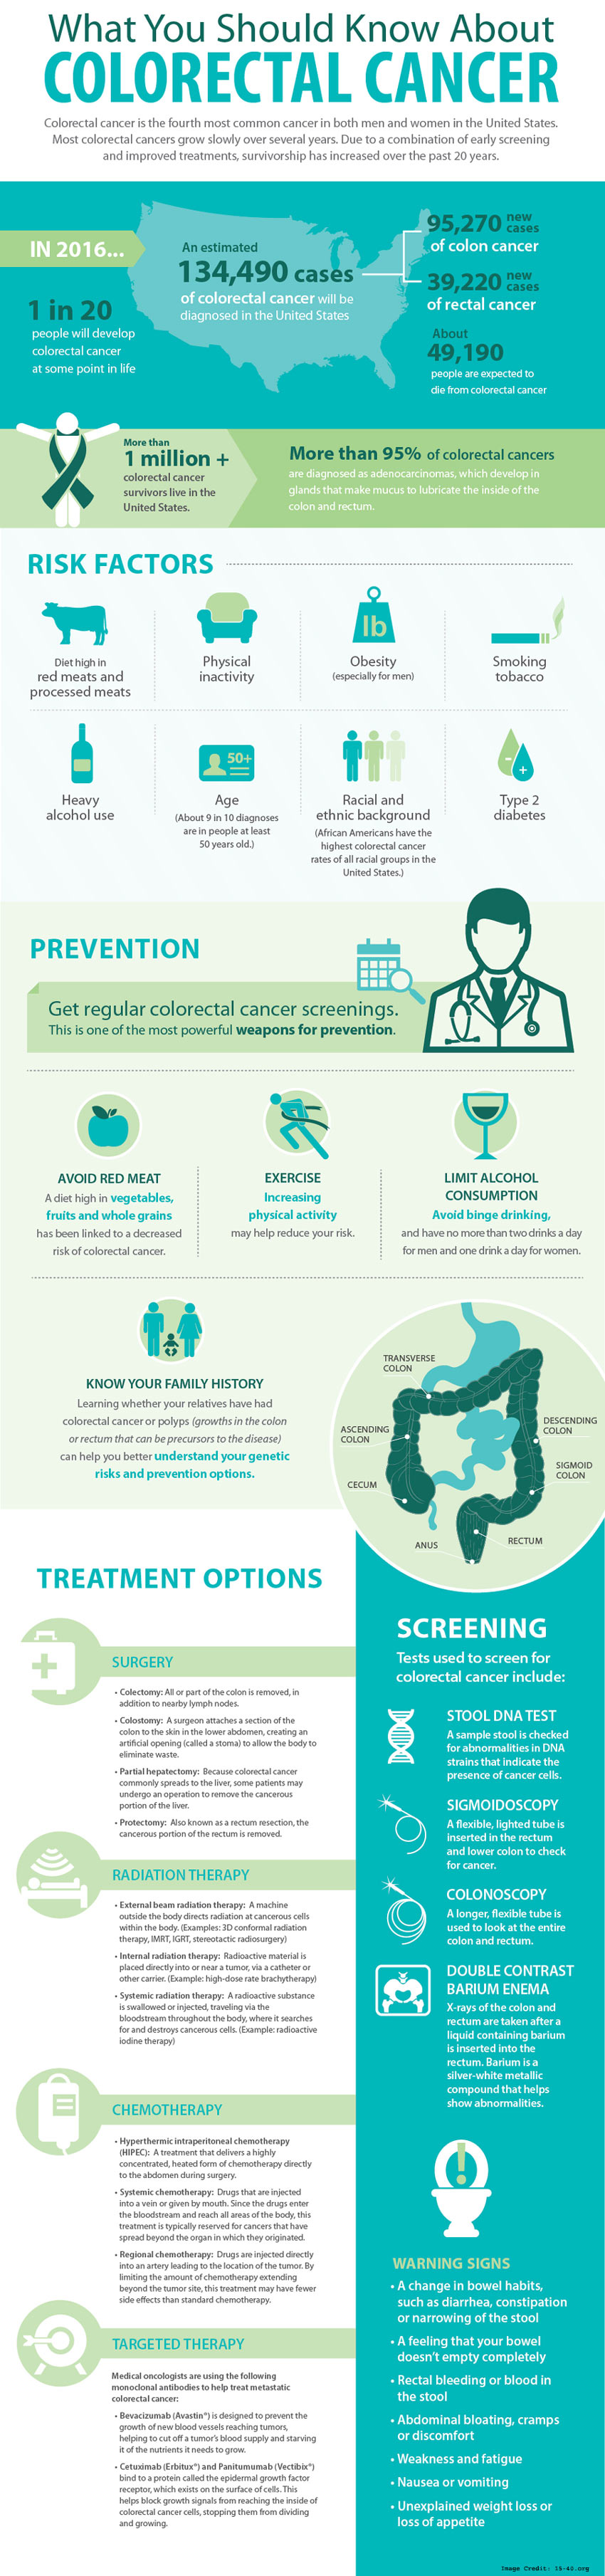 About Colorectal Cancer Info